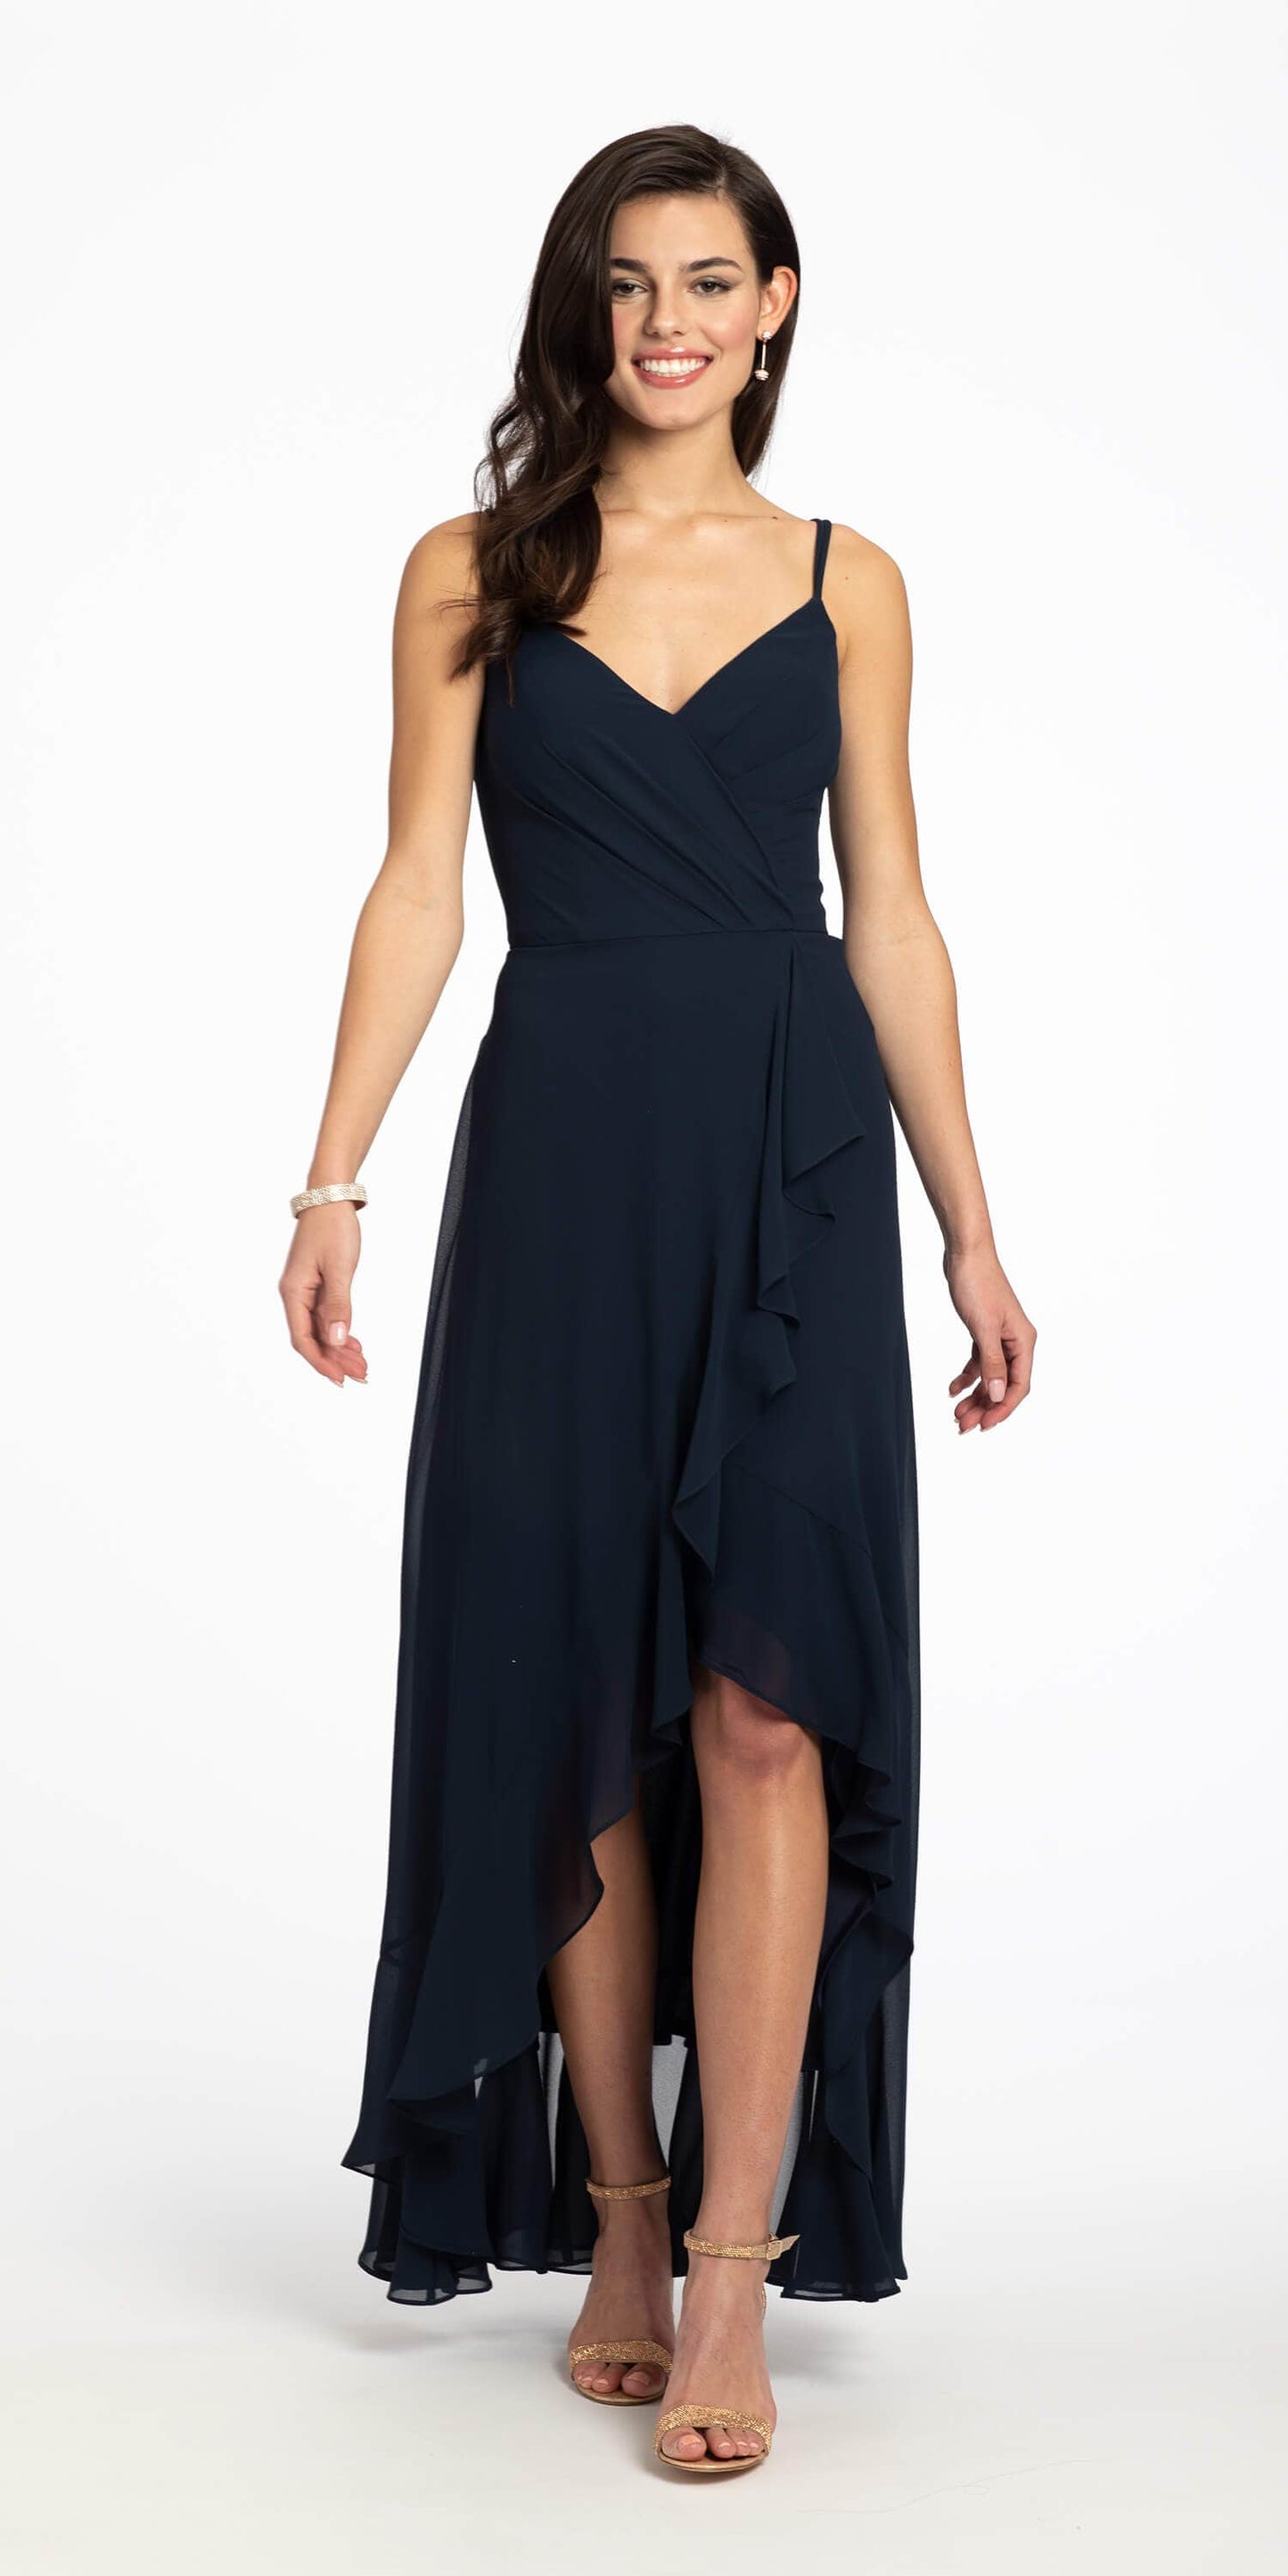 Camille La Vie Tiered Chiffon Double Strap High Low Dress missy / 14 / navy